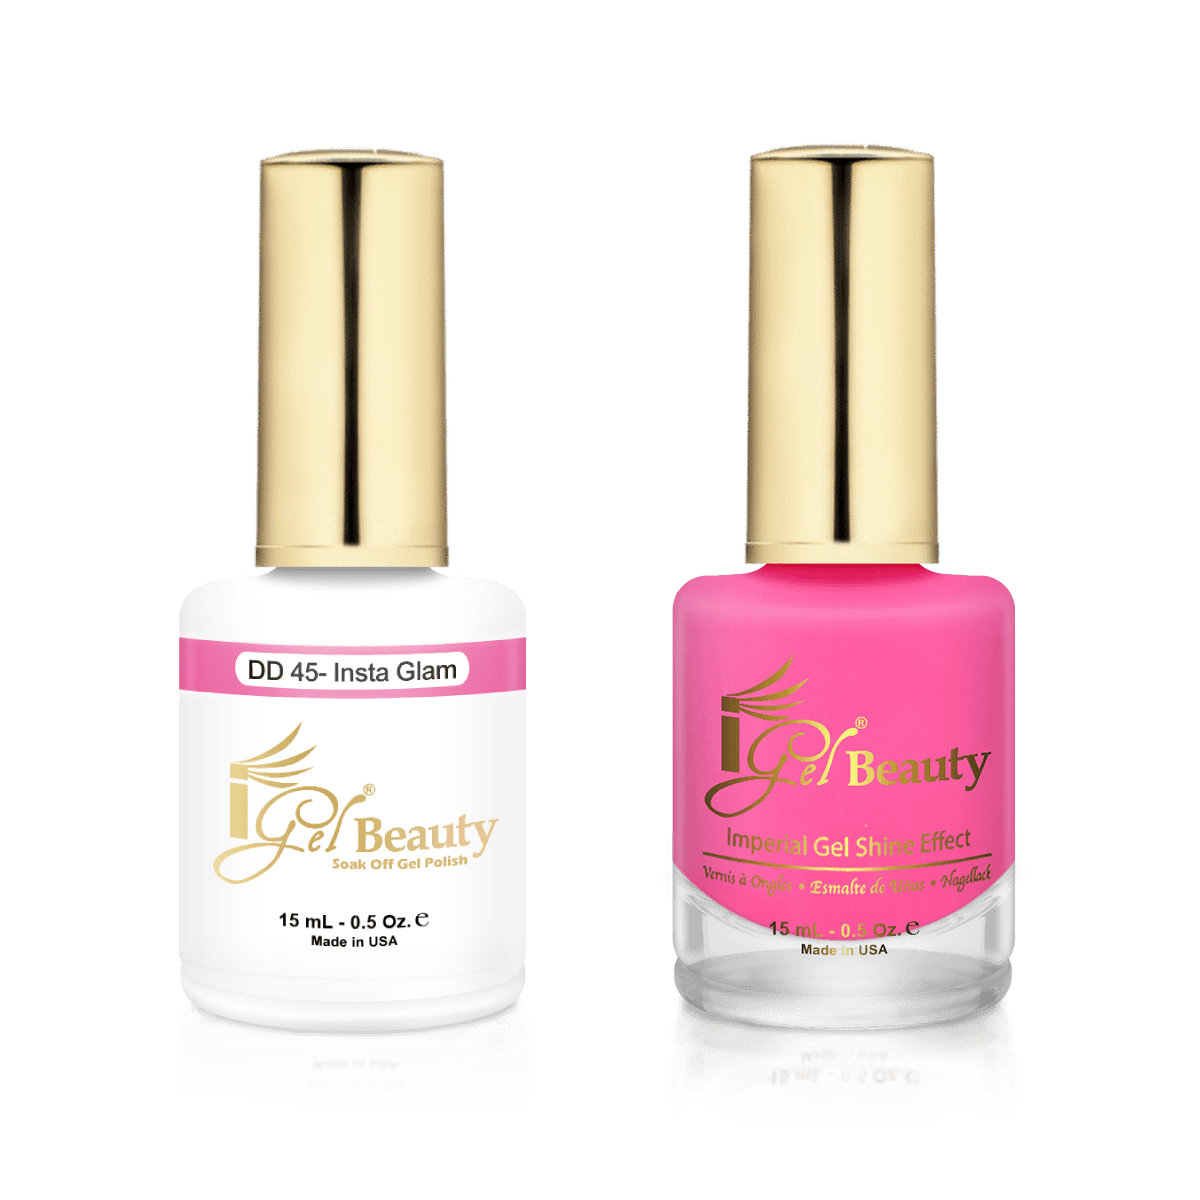 IGel Duo Gel Polish + Matching Nail Lacquer DD 45 INSTA GLAM